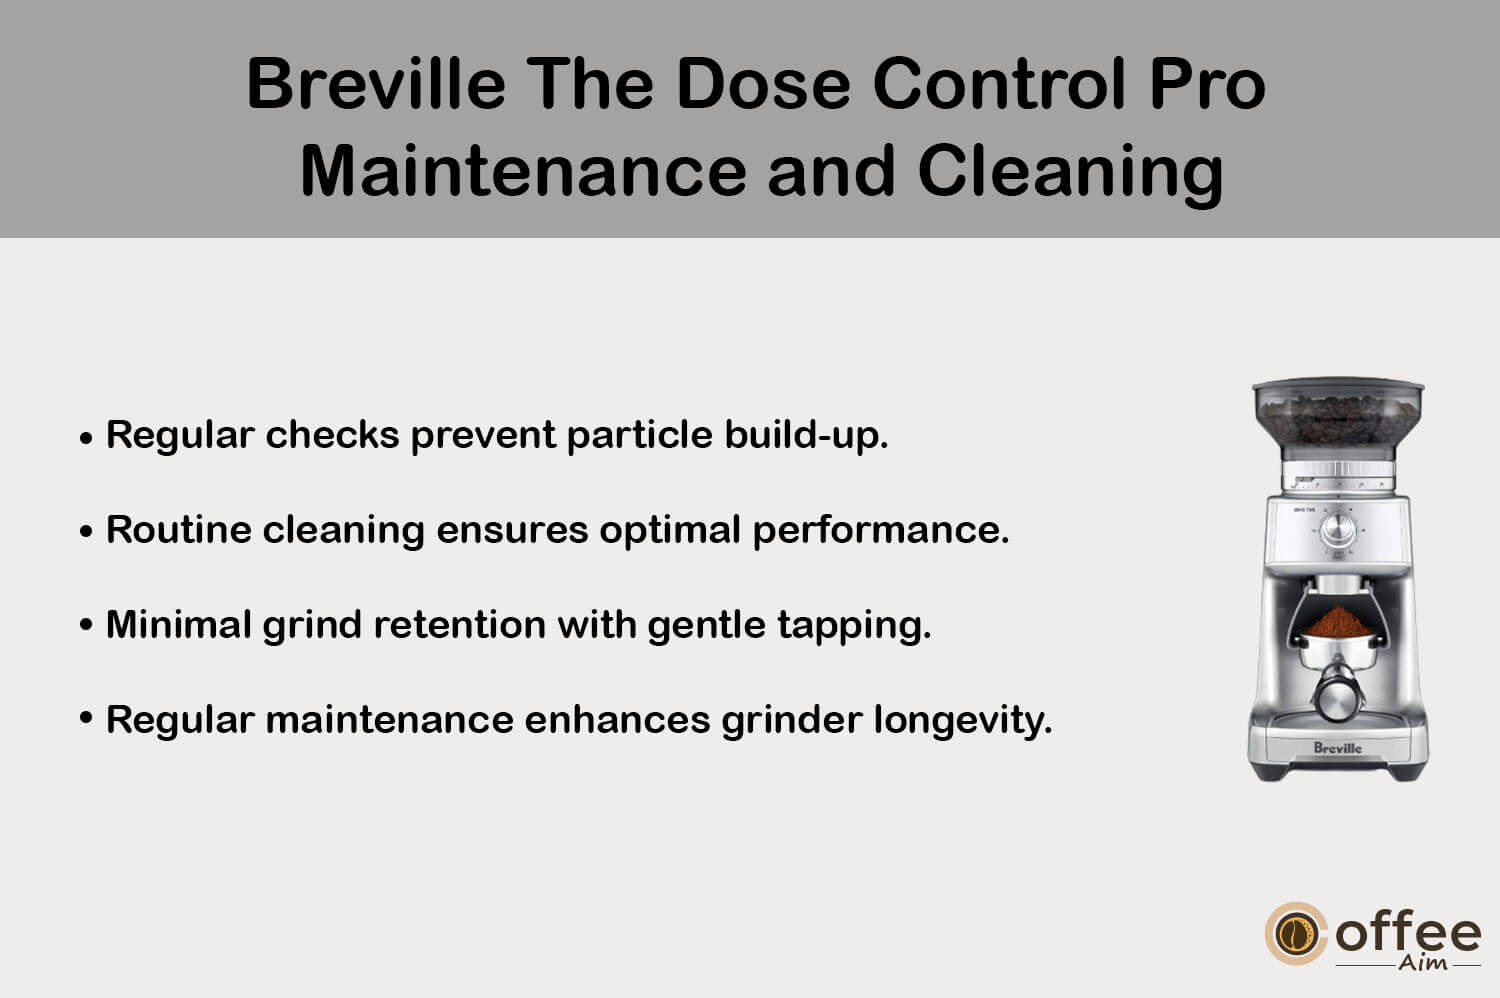 This visual presentation illustrates the meticulous maintenance and cleaning regimen essential for upkeeping the impeccable performance of the "Breville The Dose Control Pro" coffee grinder, as featured within the comprehensive article titled "Breville The Dose Control Pro Review."